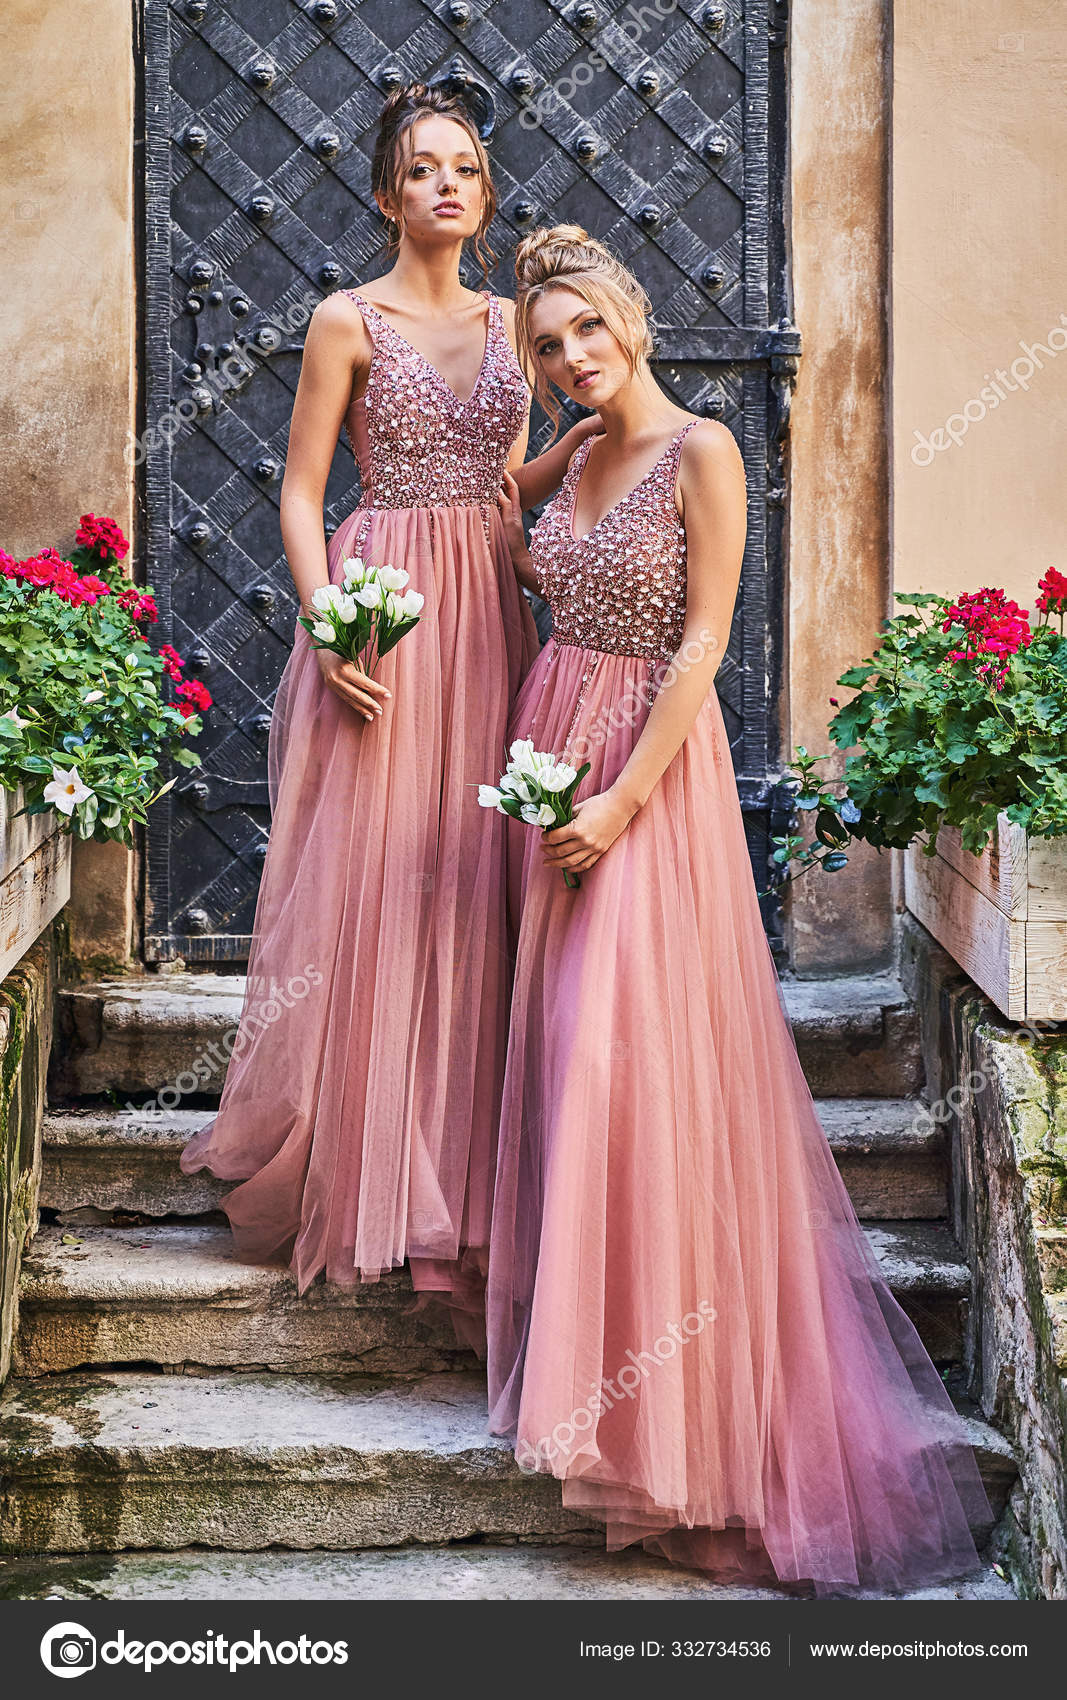 Beautiful bridesmaids in gorgeous elegant stylish red pink violet floor  length v neck chiffon gown dress decorated with sequins sparkles and  rhinestones holding flowers bouquets. Wedding day in old Photos | Adobe